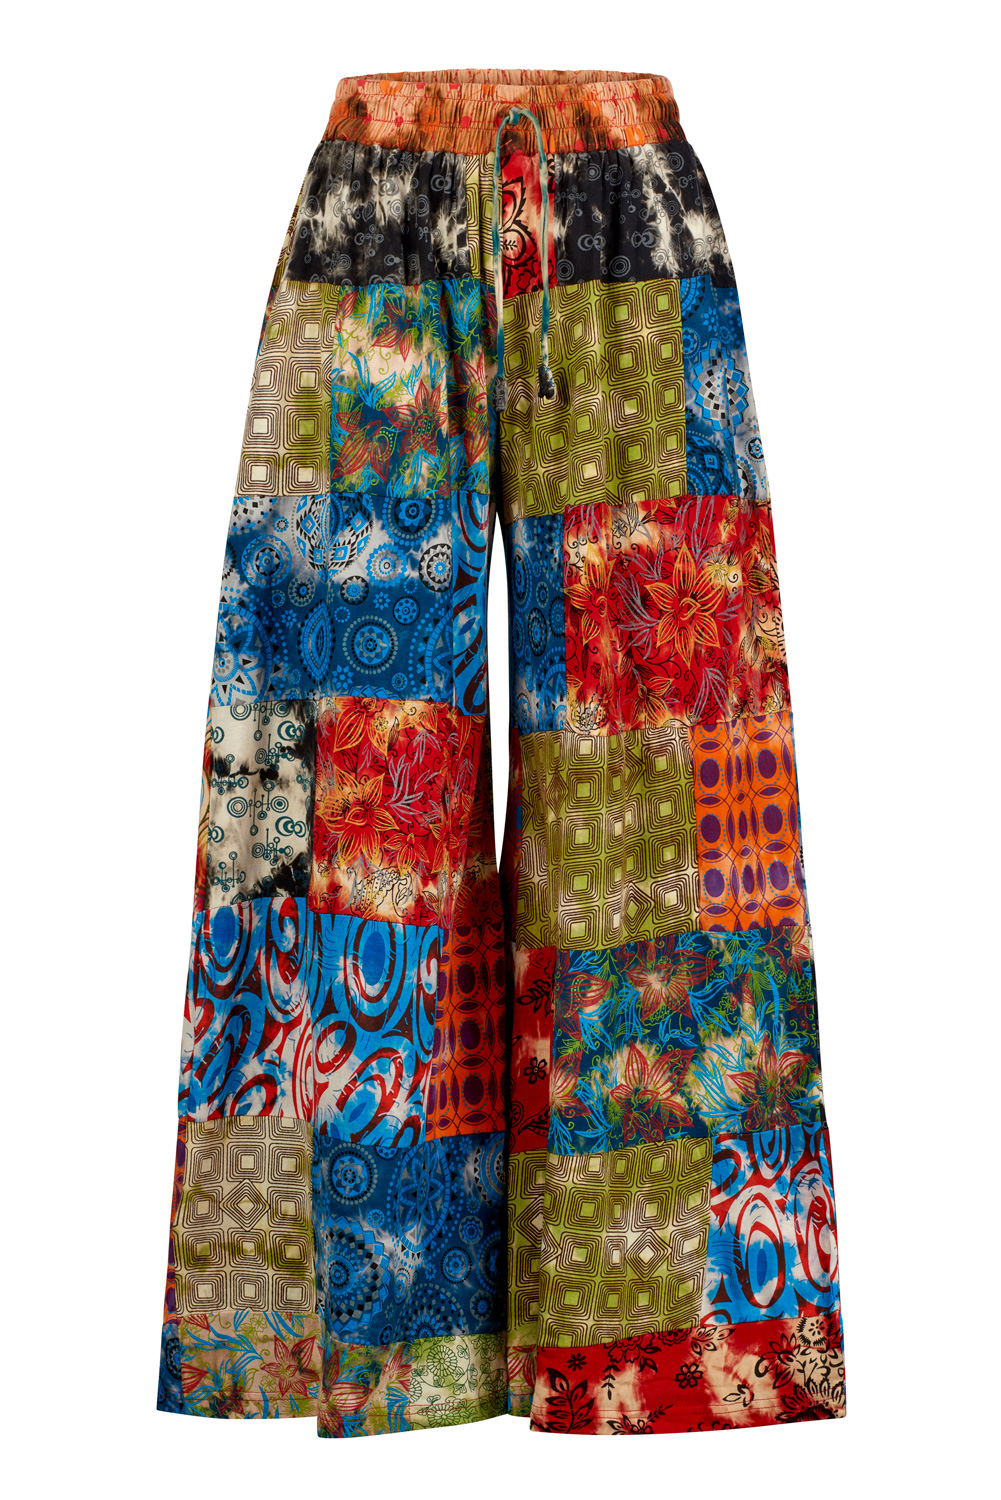 Unisex Cotton Multicolored Patchwork Lounge Tall Trousers | Multicoloured |  Split-Skirts-Pants, Patchwork, Tall, Pocket, Striped, Bohemian